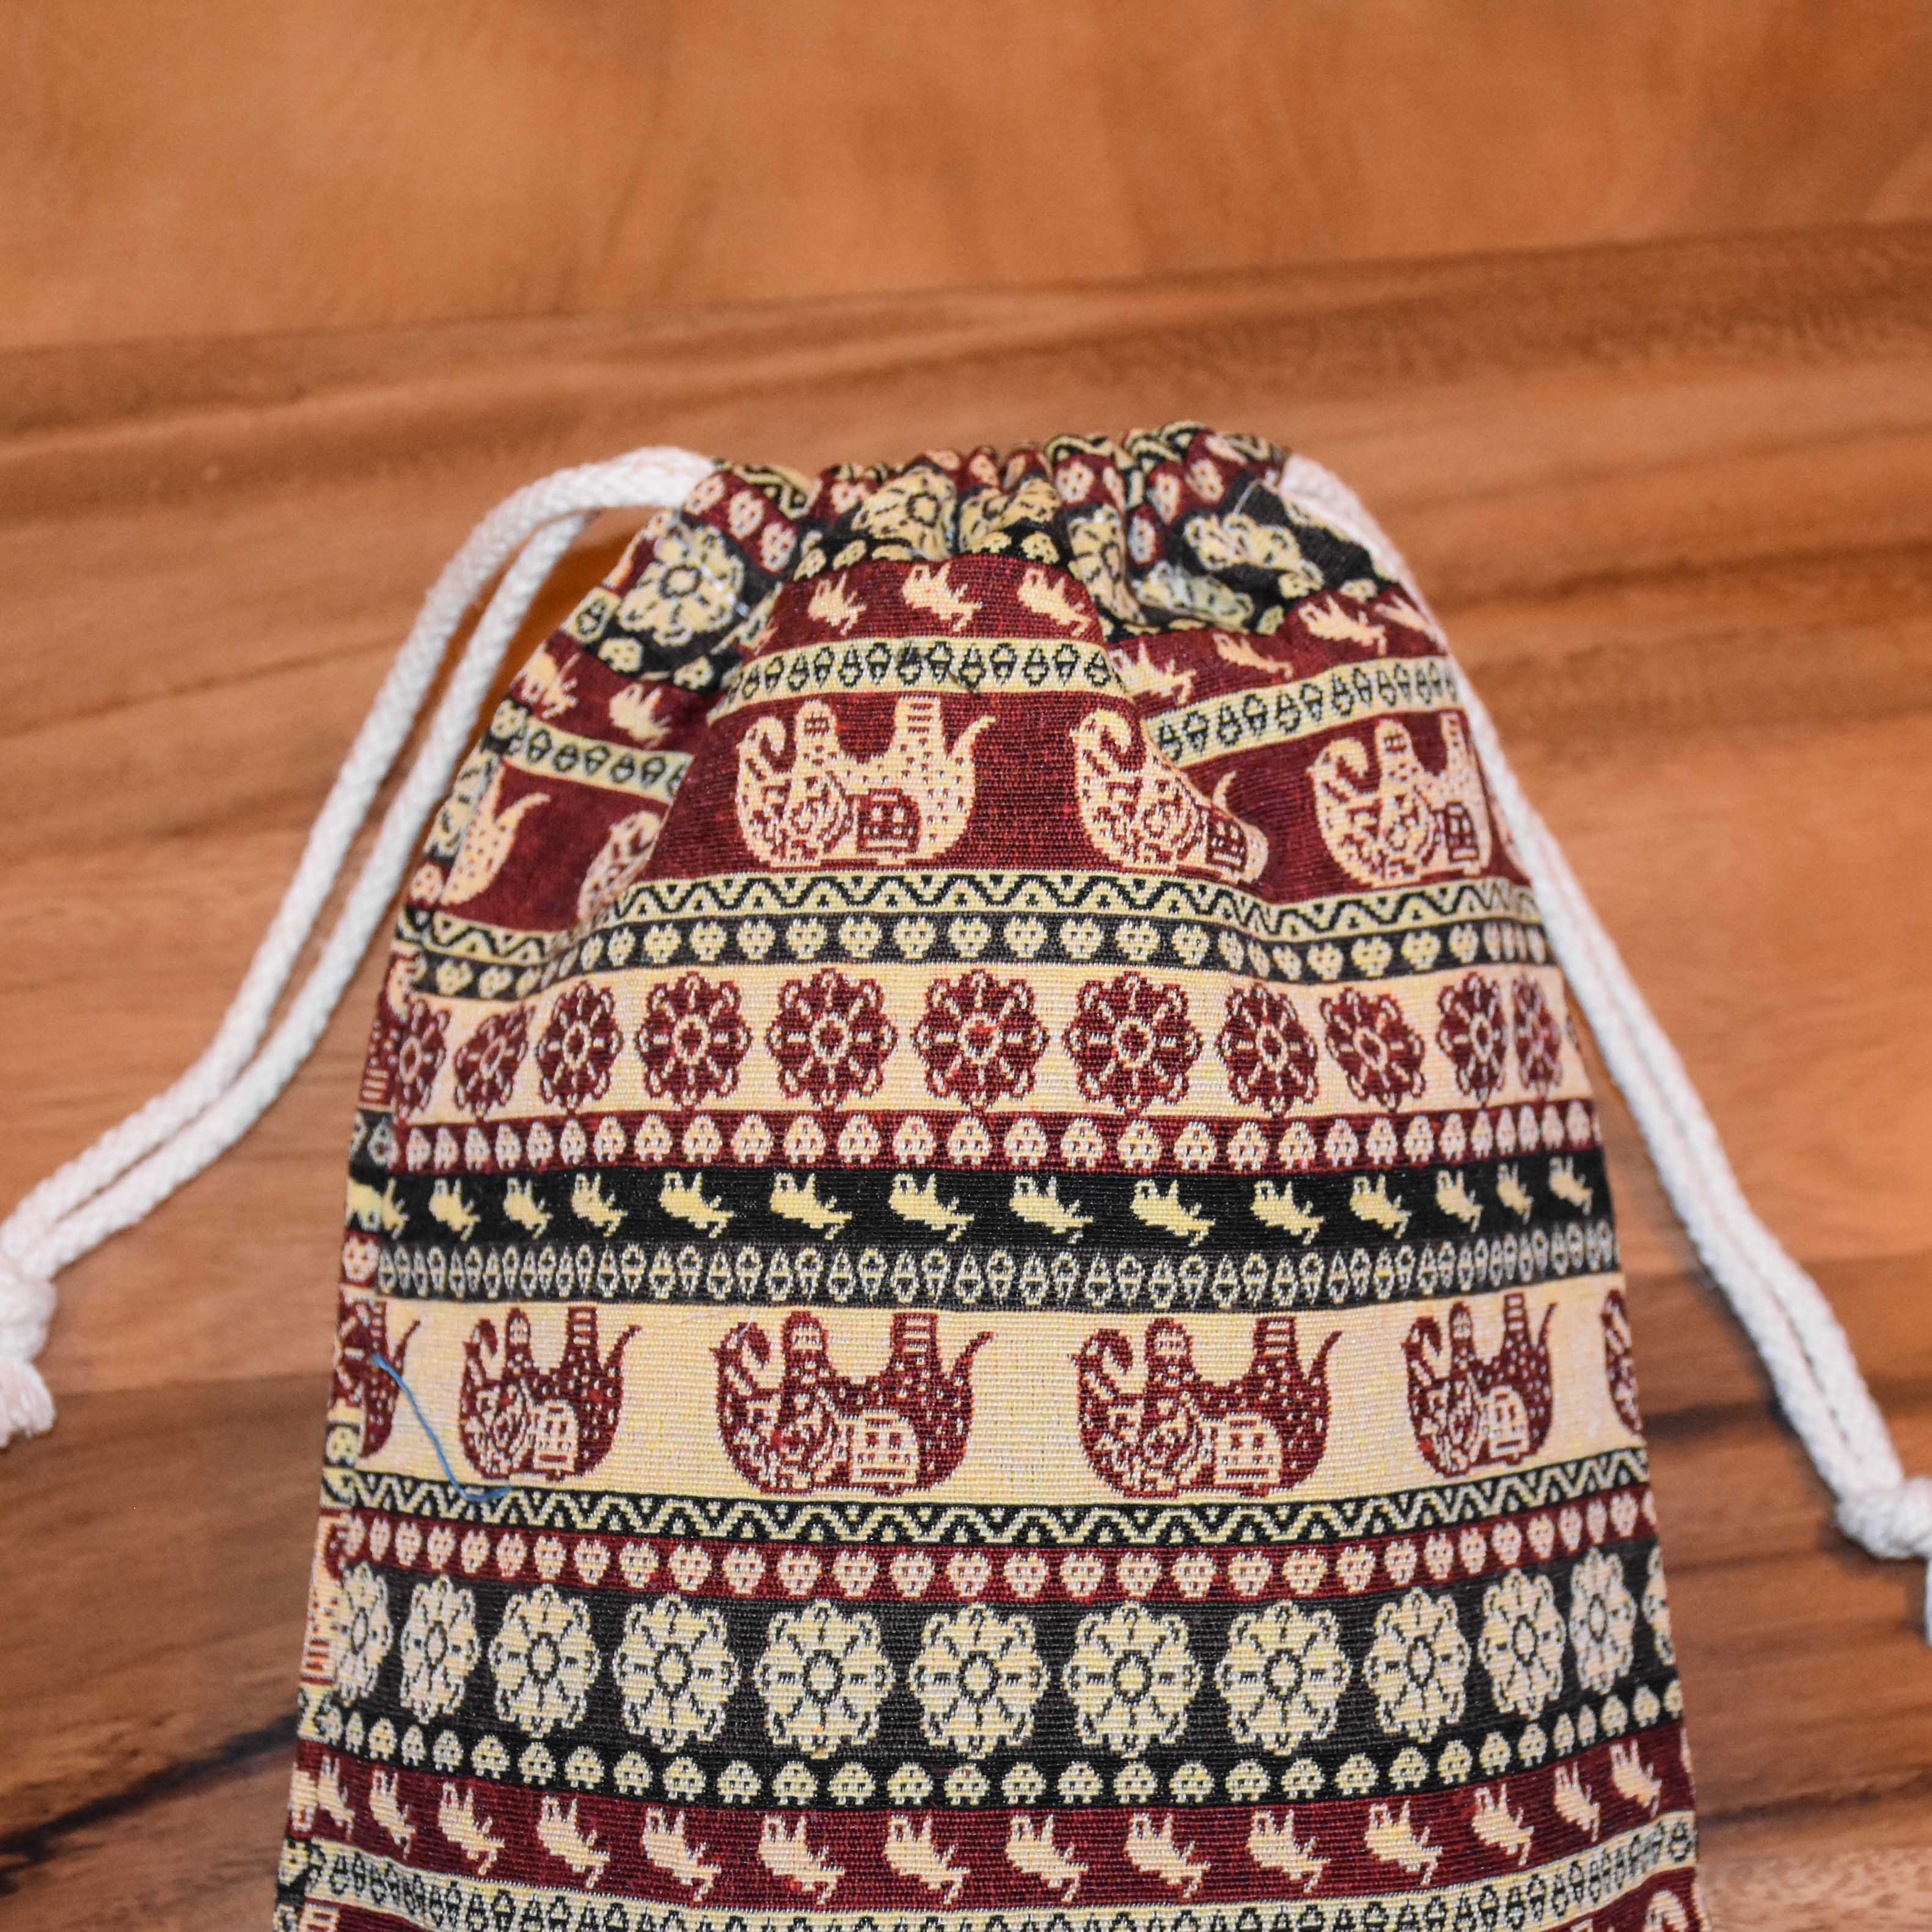 MANDALAY TRAVEL BAG Elepanta Travel Bags - Buy Today Elephant Pants Jewelry And Bohemian Clothes Handmade In Thailand Help To Save The Elephants FairTrade And Vegan